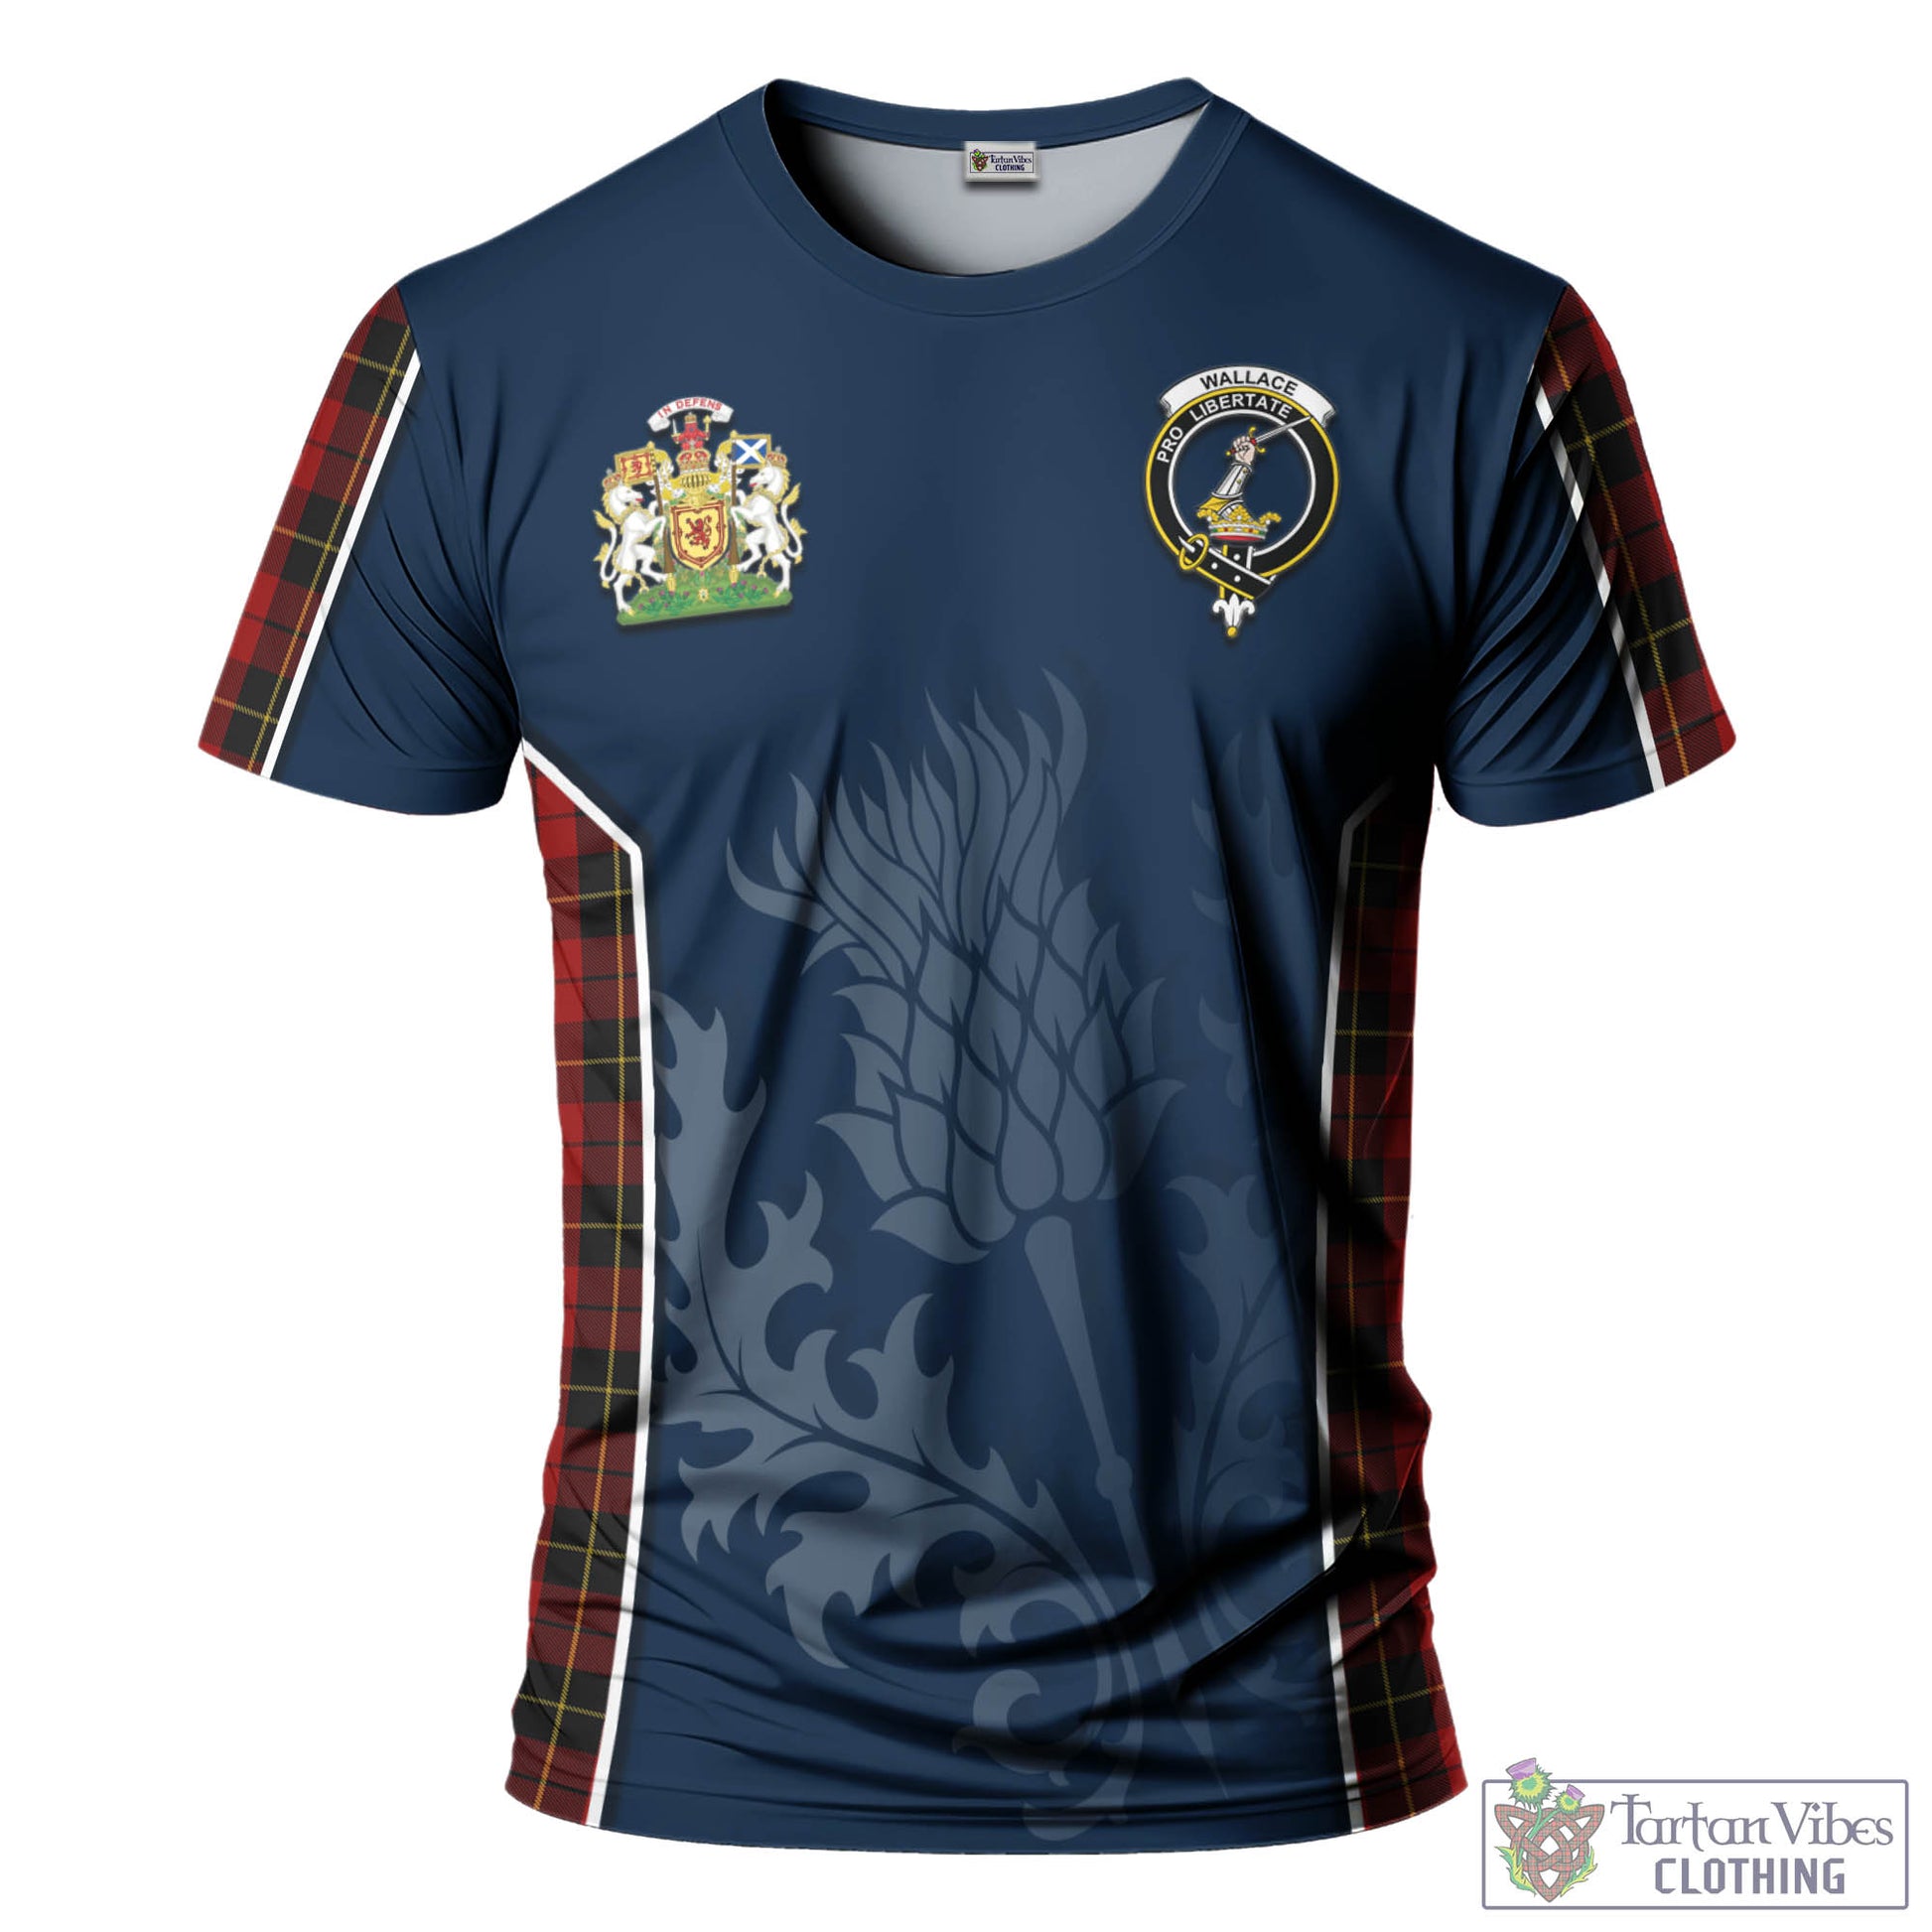 Tartan Vibes Clothing Wallace Tartan T-Shirt with Family Crest and Scottish Thistle Vibes Sport Style